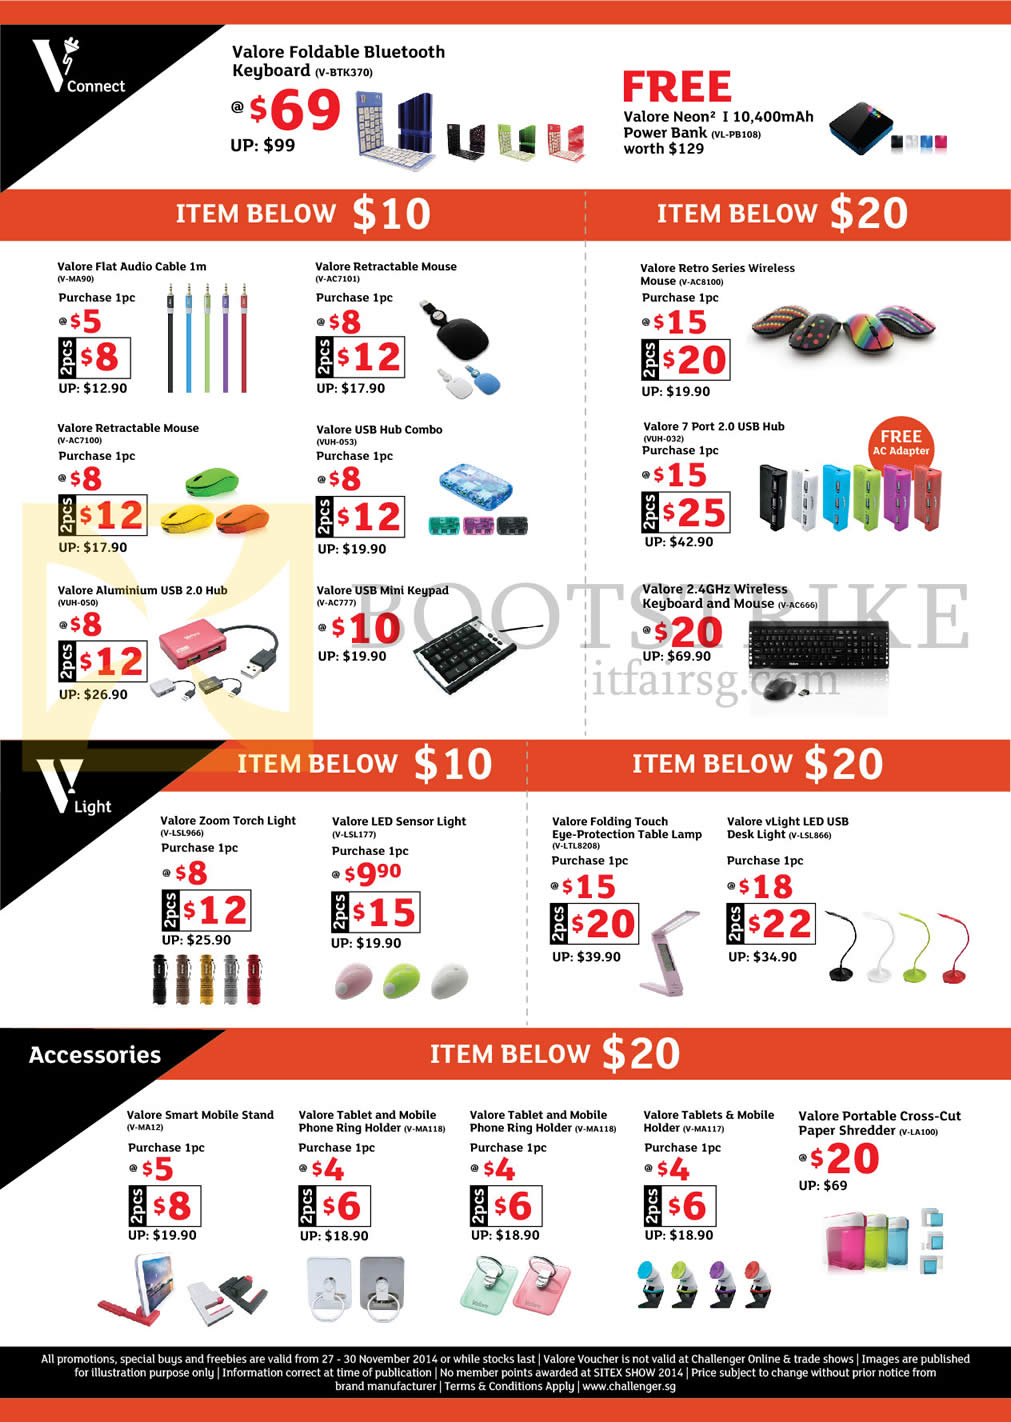 SITEX 2014 price list image brochure of Challenger Valore Accessories Cable, Mouse, USB Hub, Wireless Keyboard, Torch Light, Table Lamp, Desk Light, Mobile Stand, Mobile Phone Ring Holder, Paper Shredder